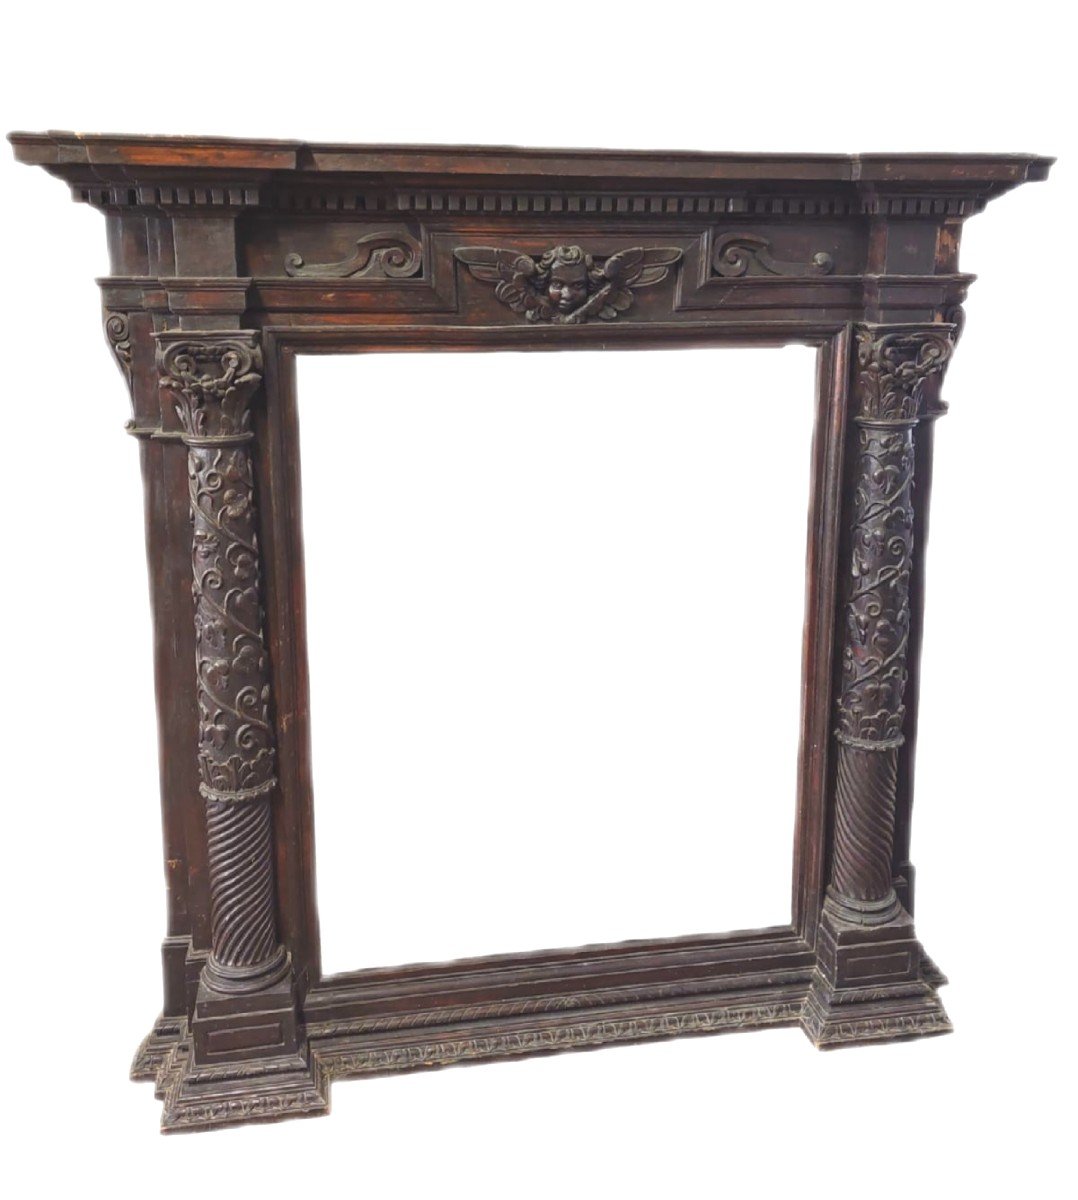 Large Carved Frame In Renaissance Style, 17th Century Italy